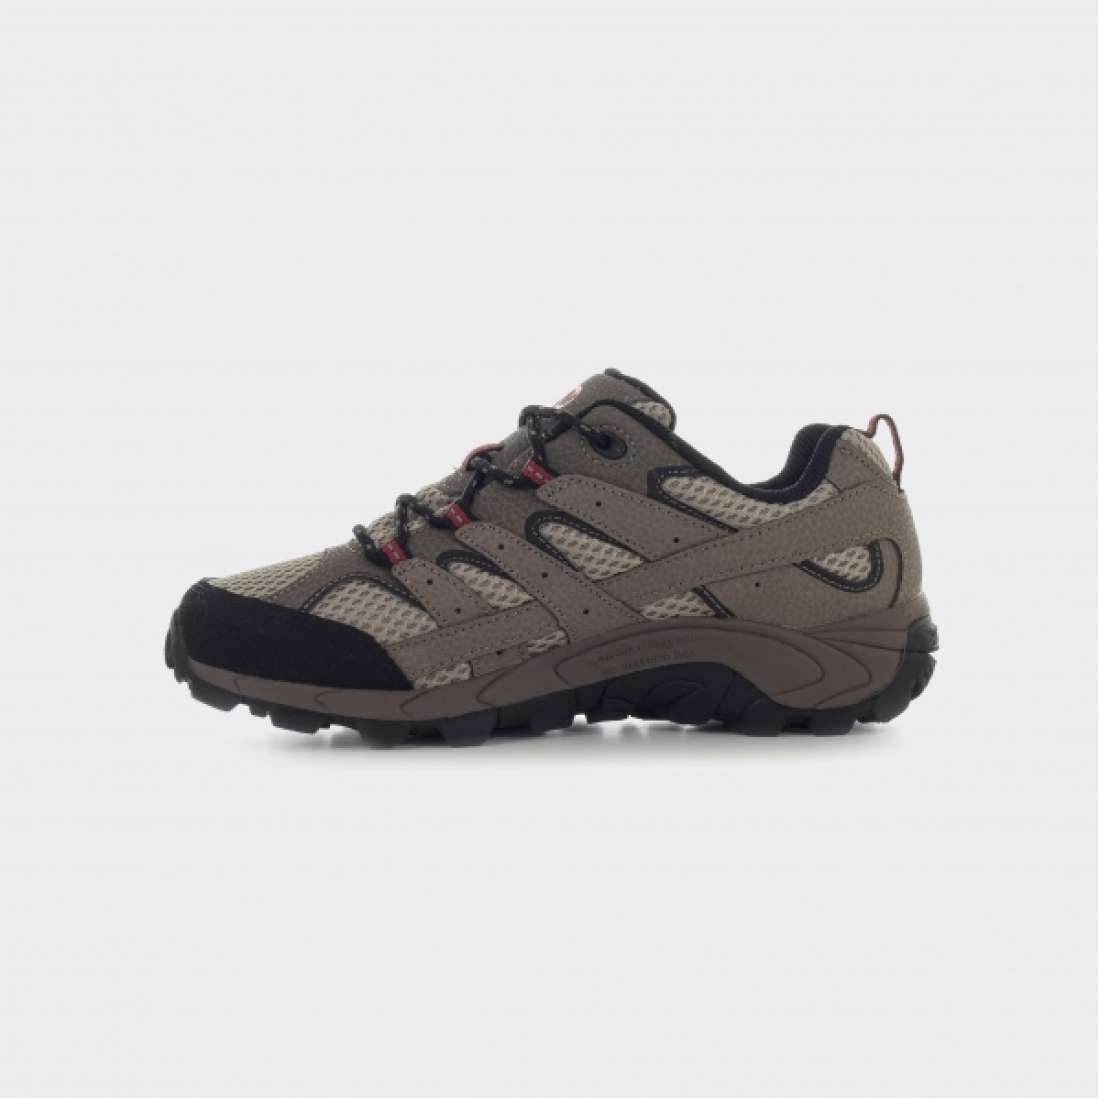 MERRELL MOAB 2 LOW LACE BARK BROWN